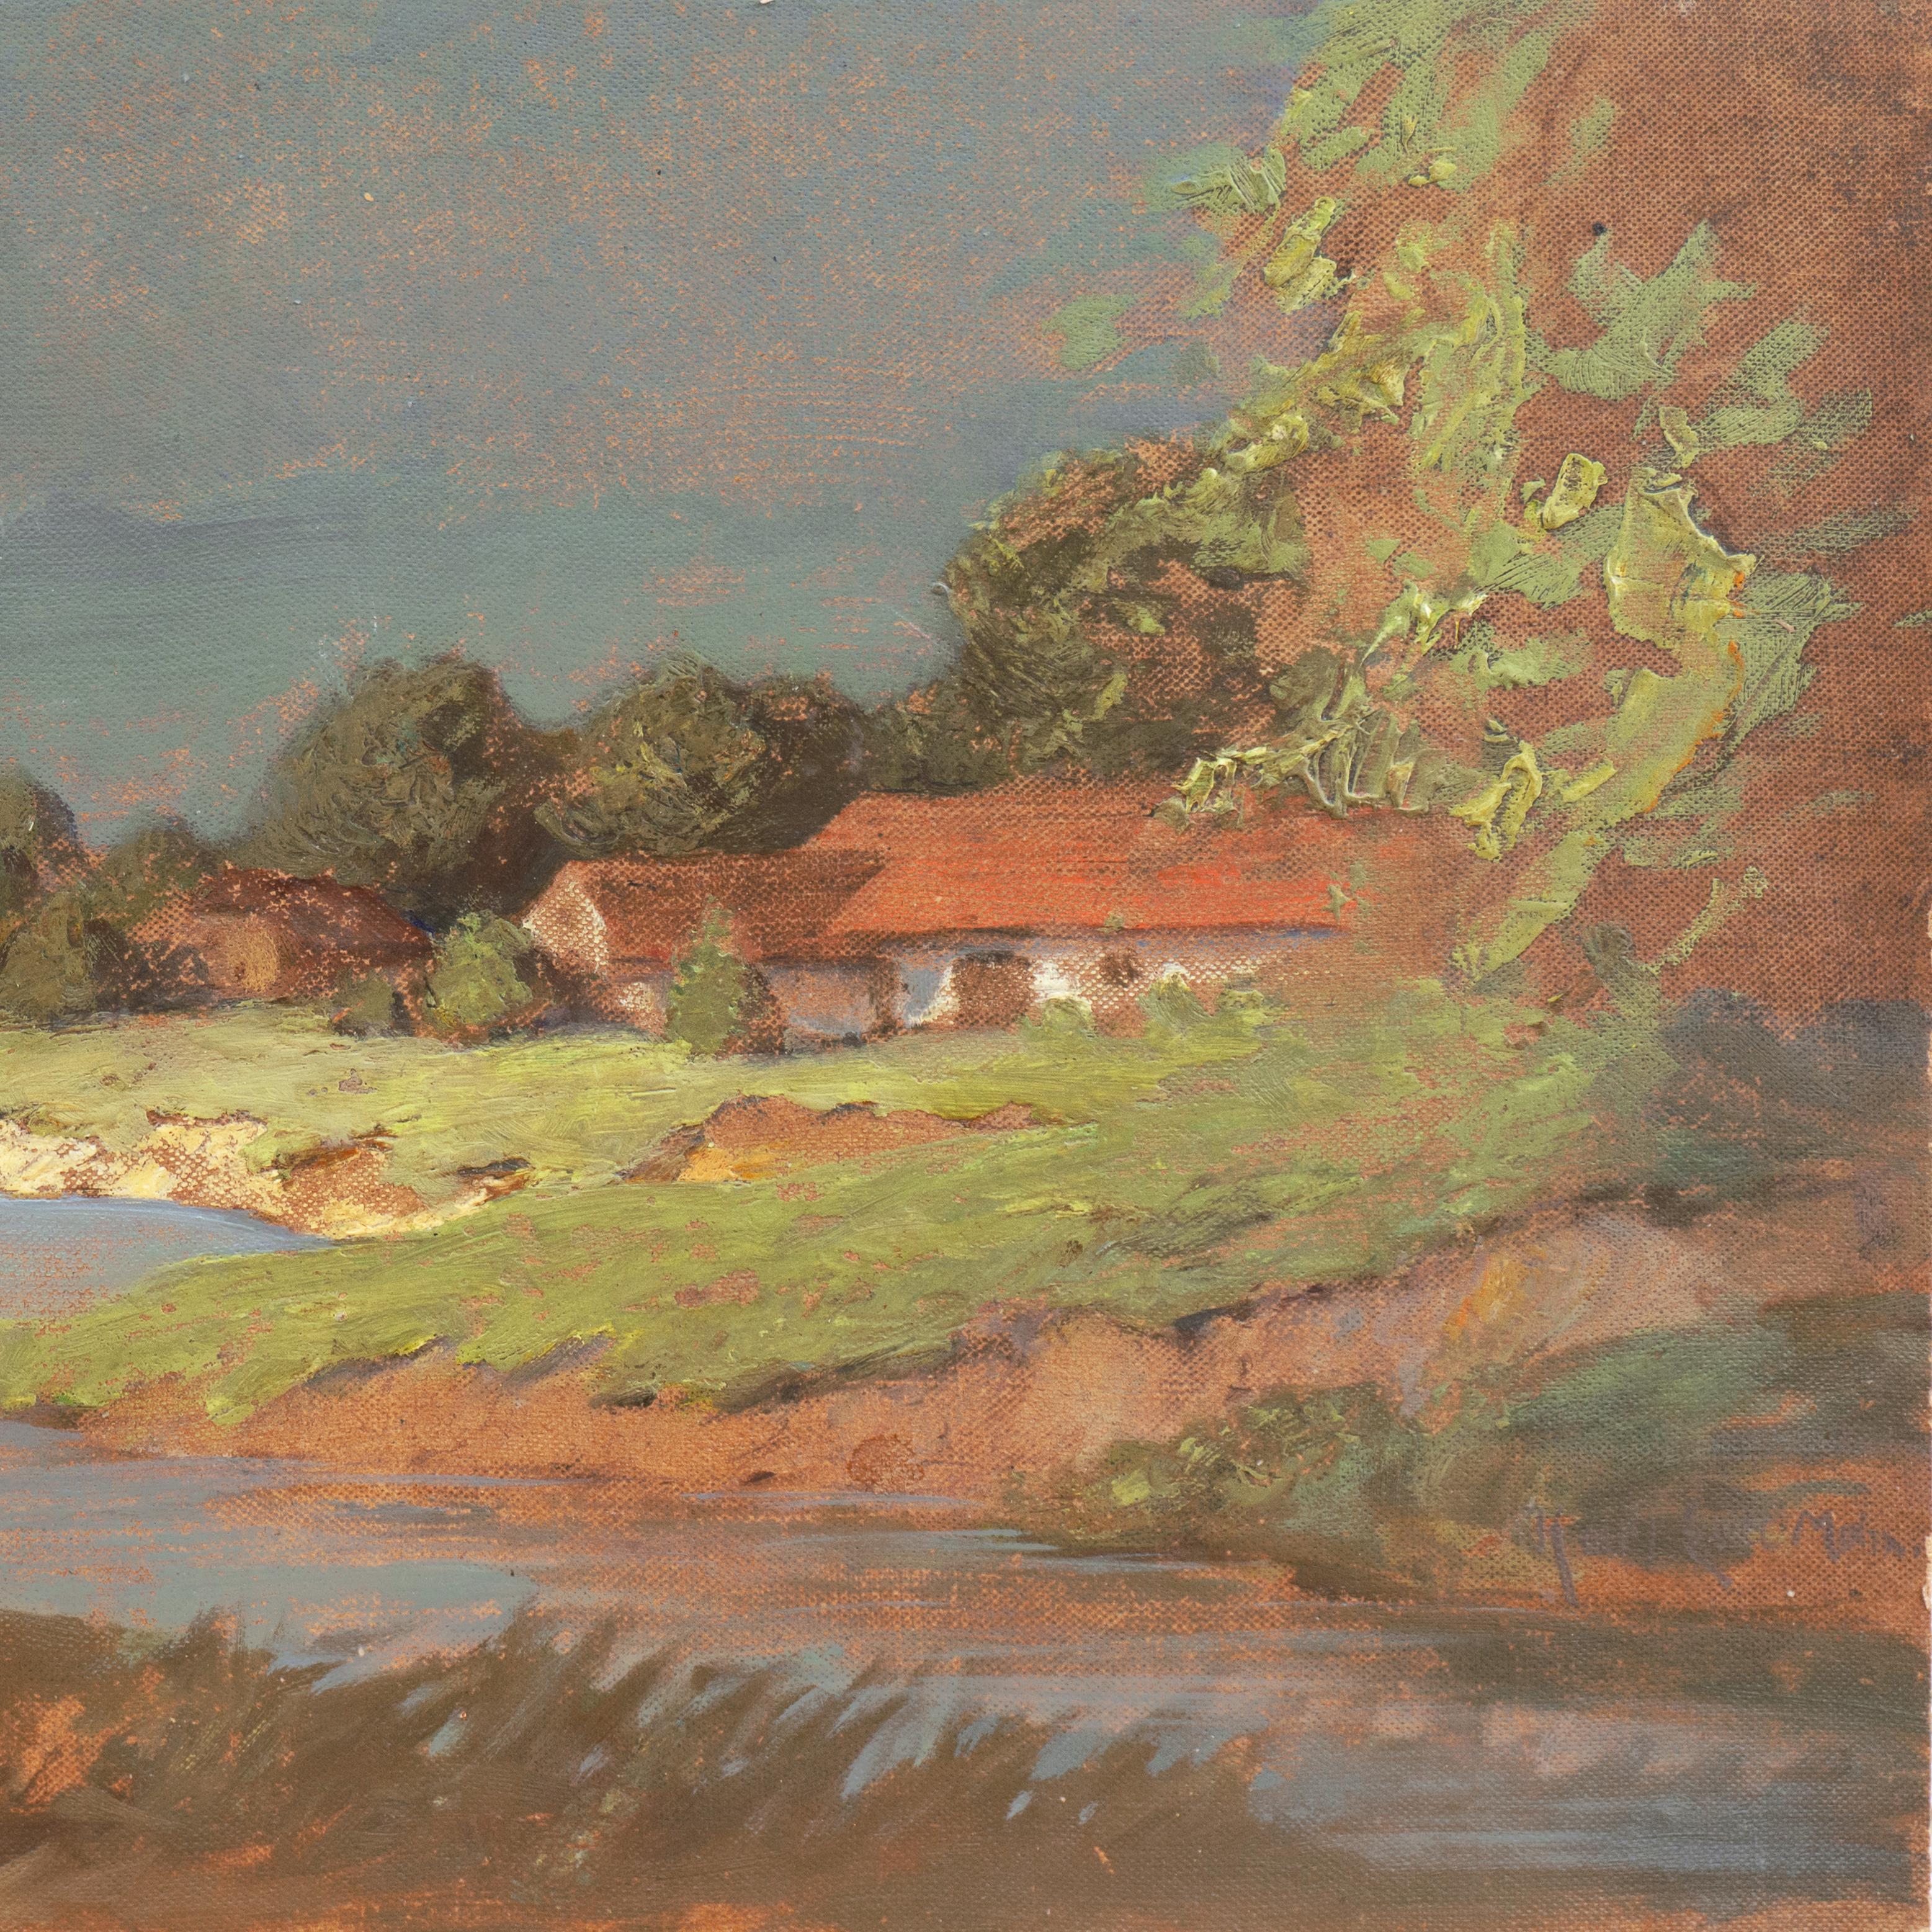 'Hungarian Landscape with Farmhouse', Munich School, National Academy, Budapest - Impressionist Painting by Endre Komaromi-Kacz